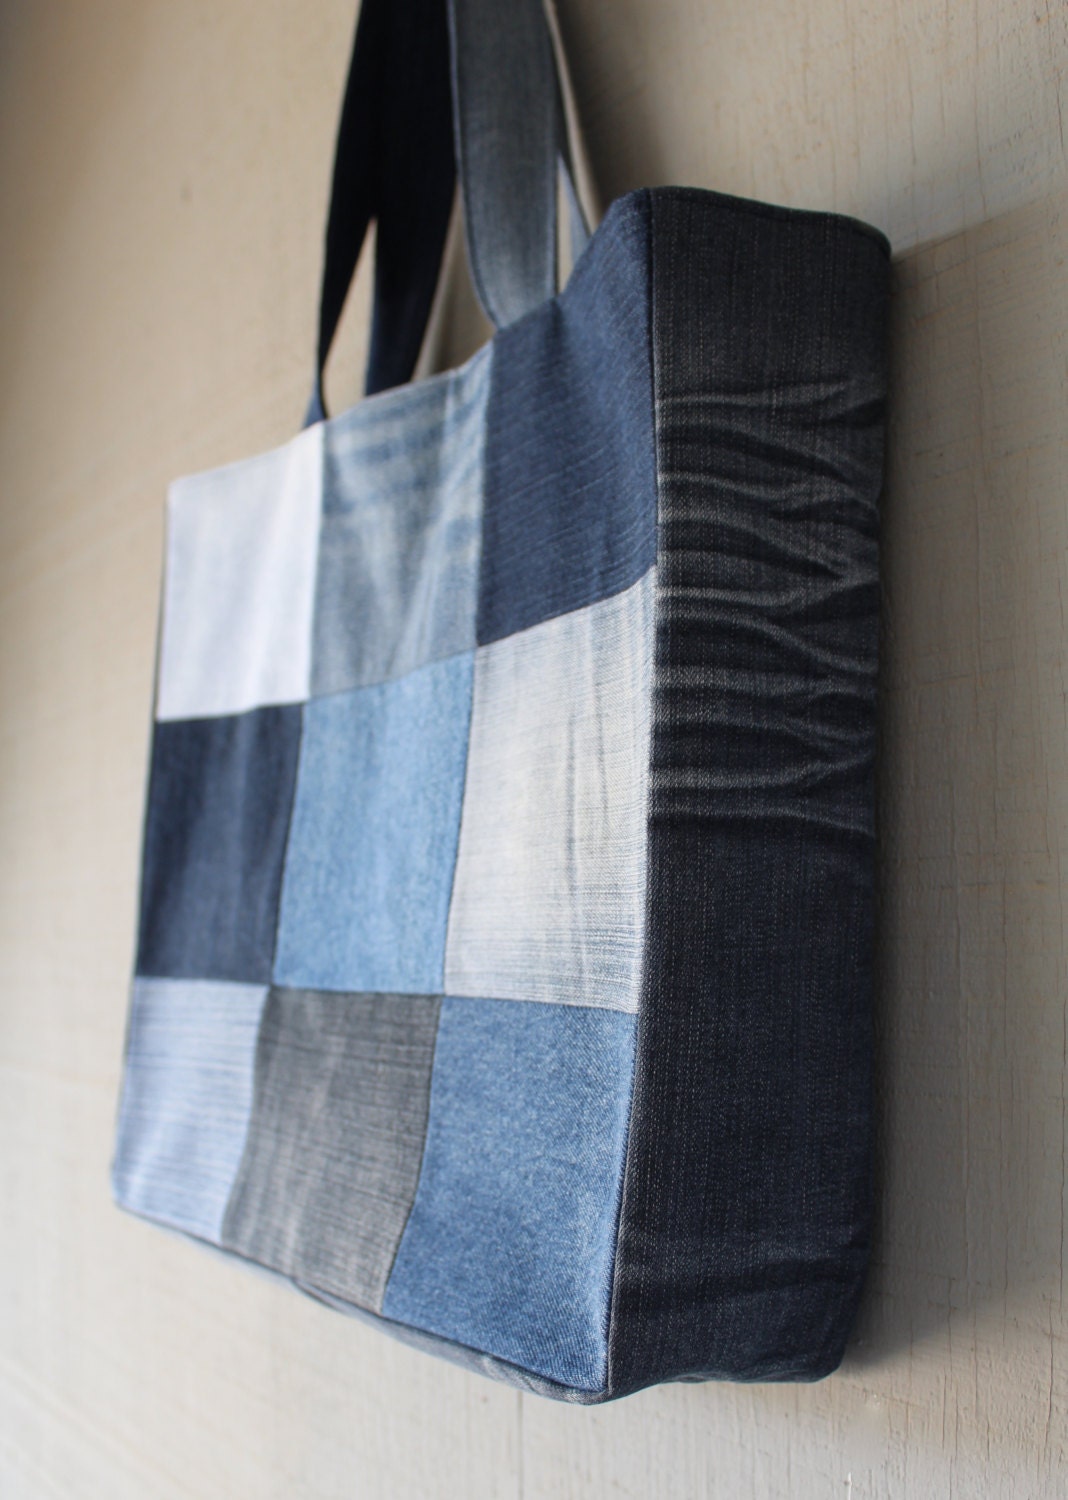 Patch Front Denim Tote Bag Fully Lined with a by AllintheJeans